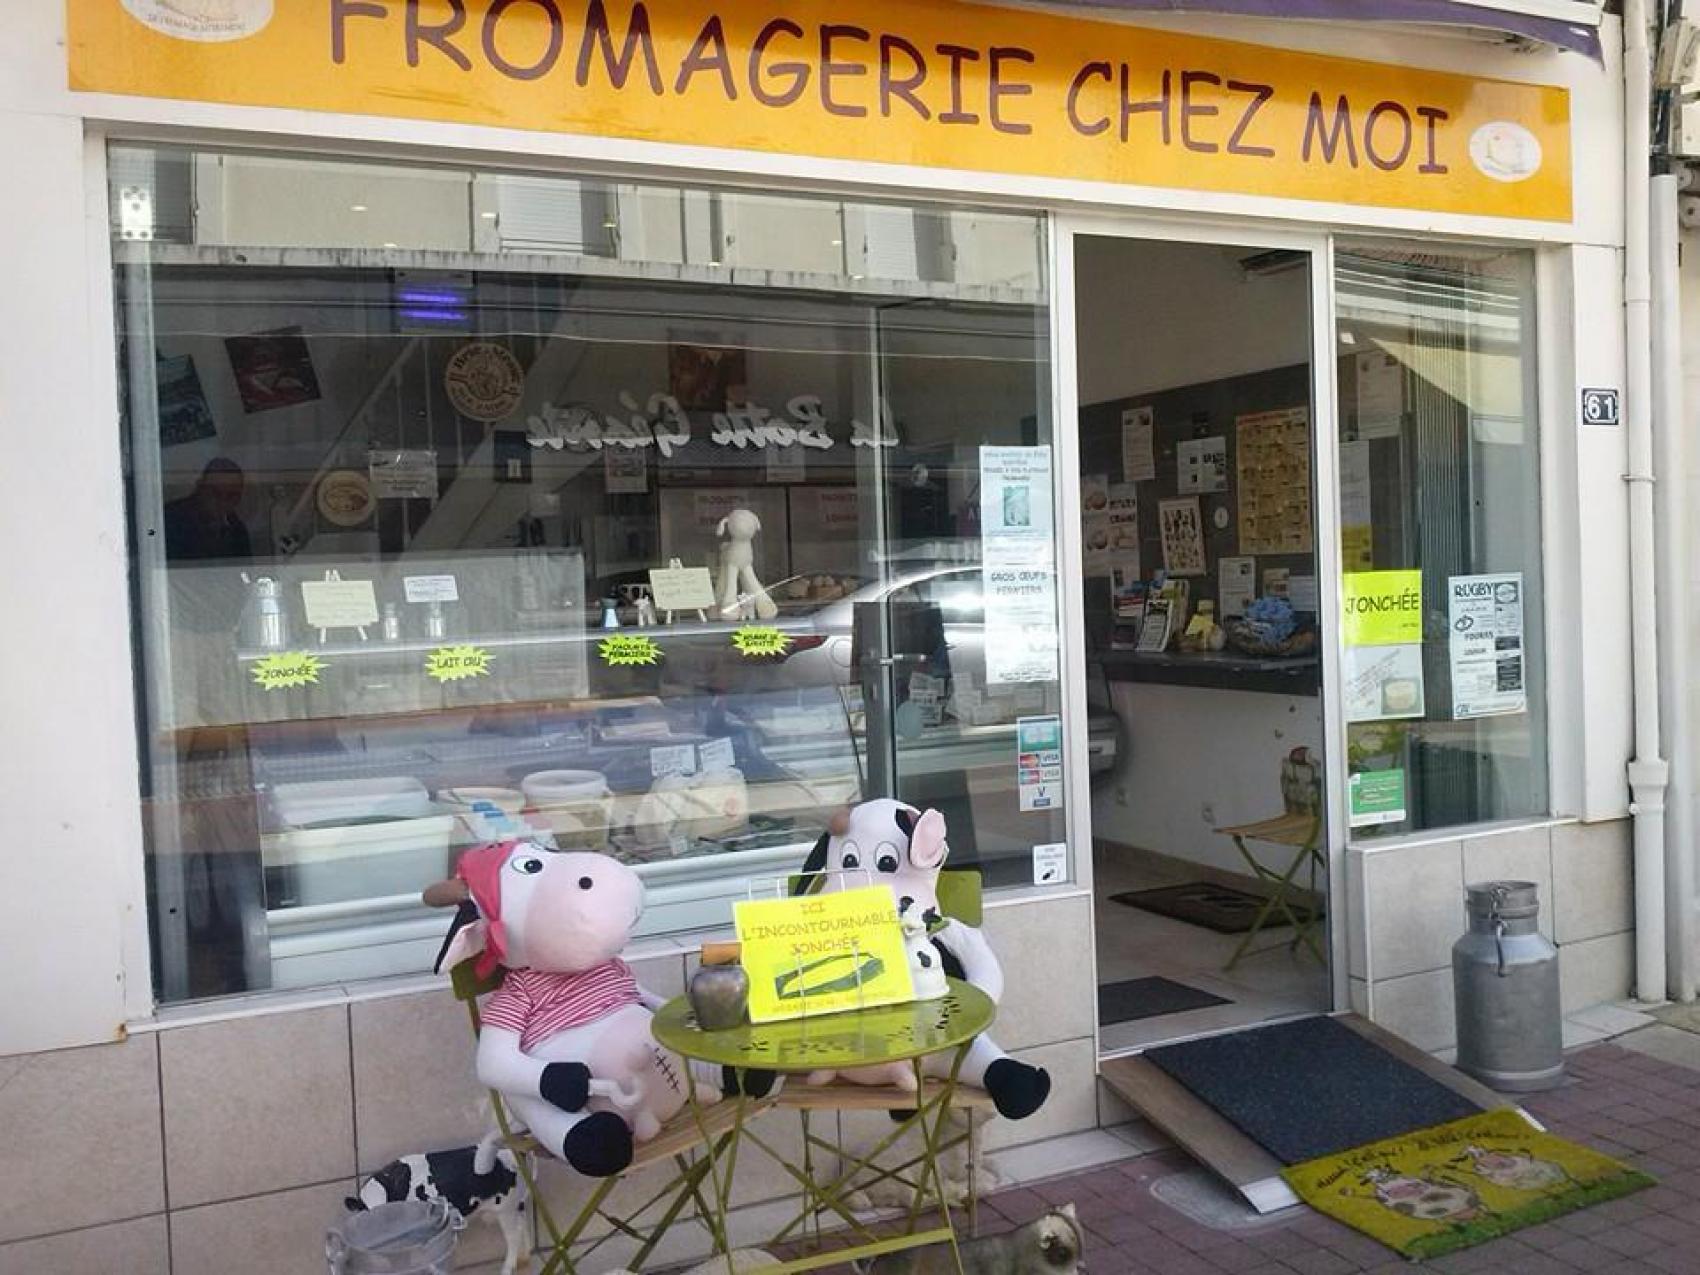 FROMAGERIE CHEZ MOI